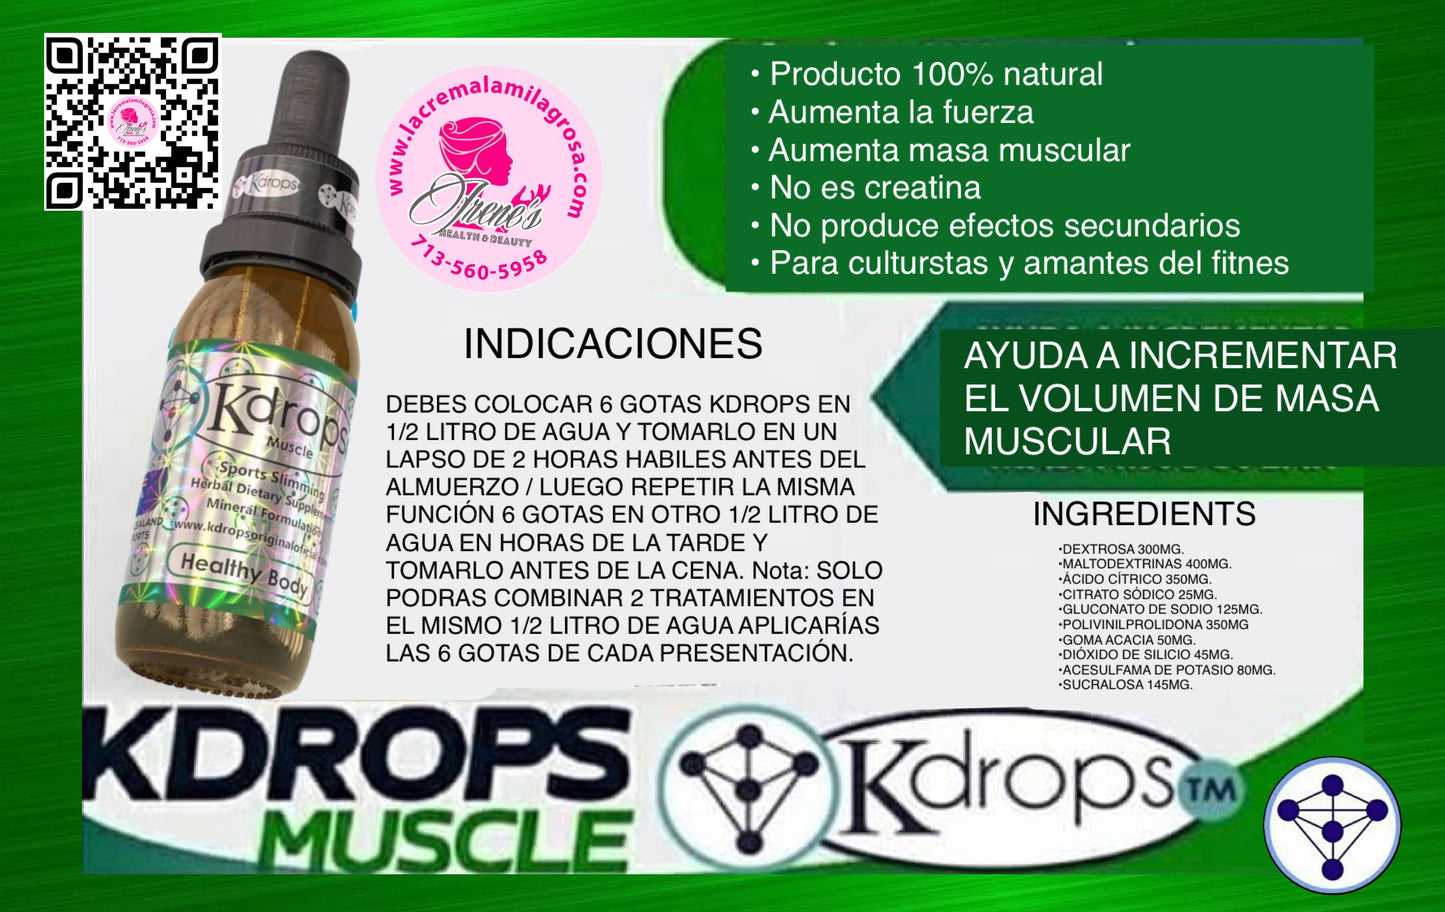 Kdrops Muscle (Músculos)